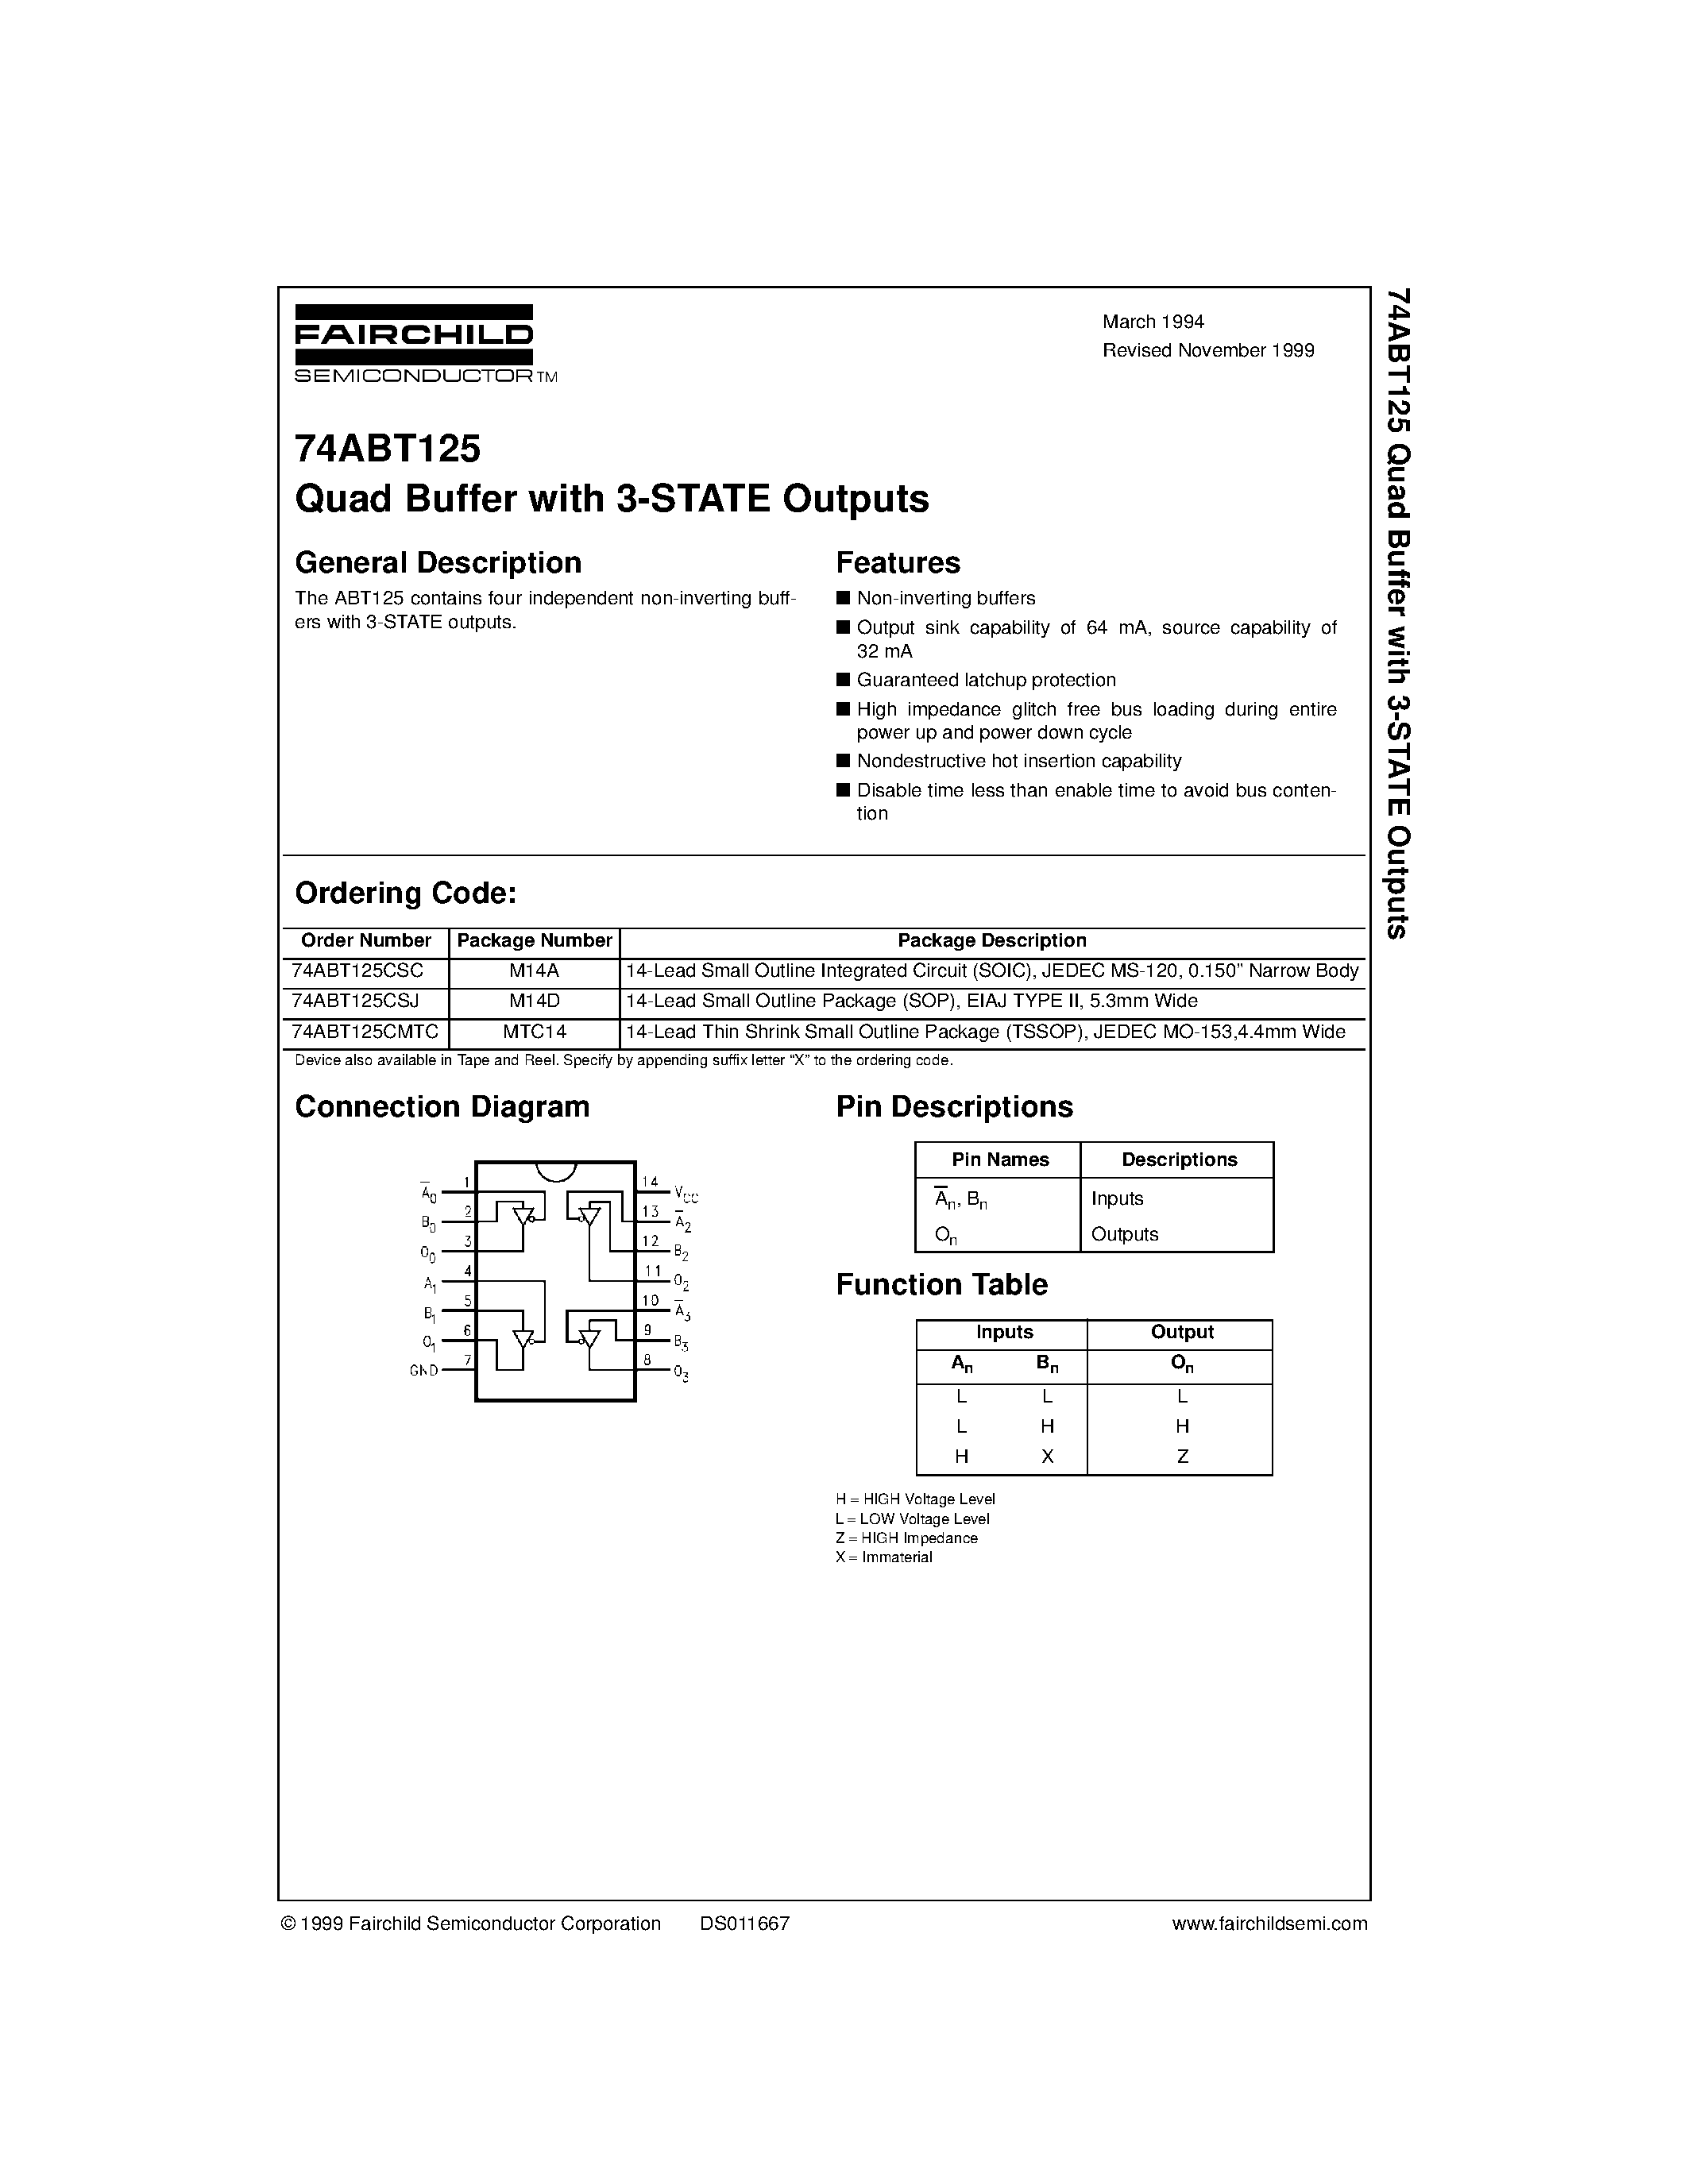 Datasheet 74ABT125CMTC - Quad Buffer with 3-STATE Outputs page 1